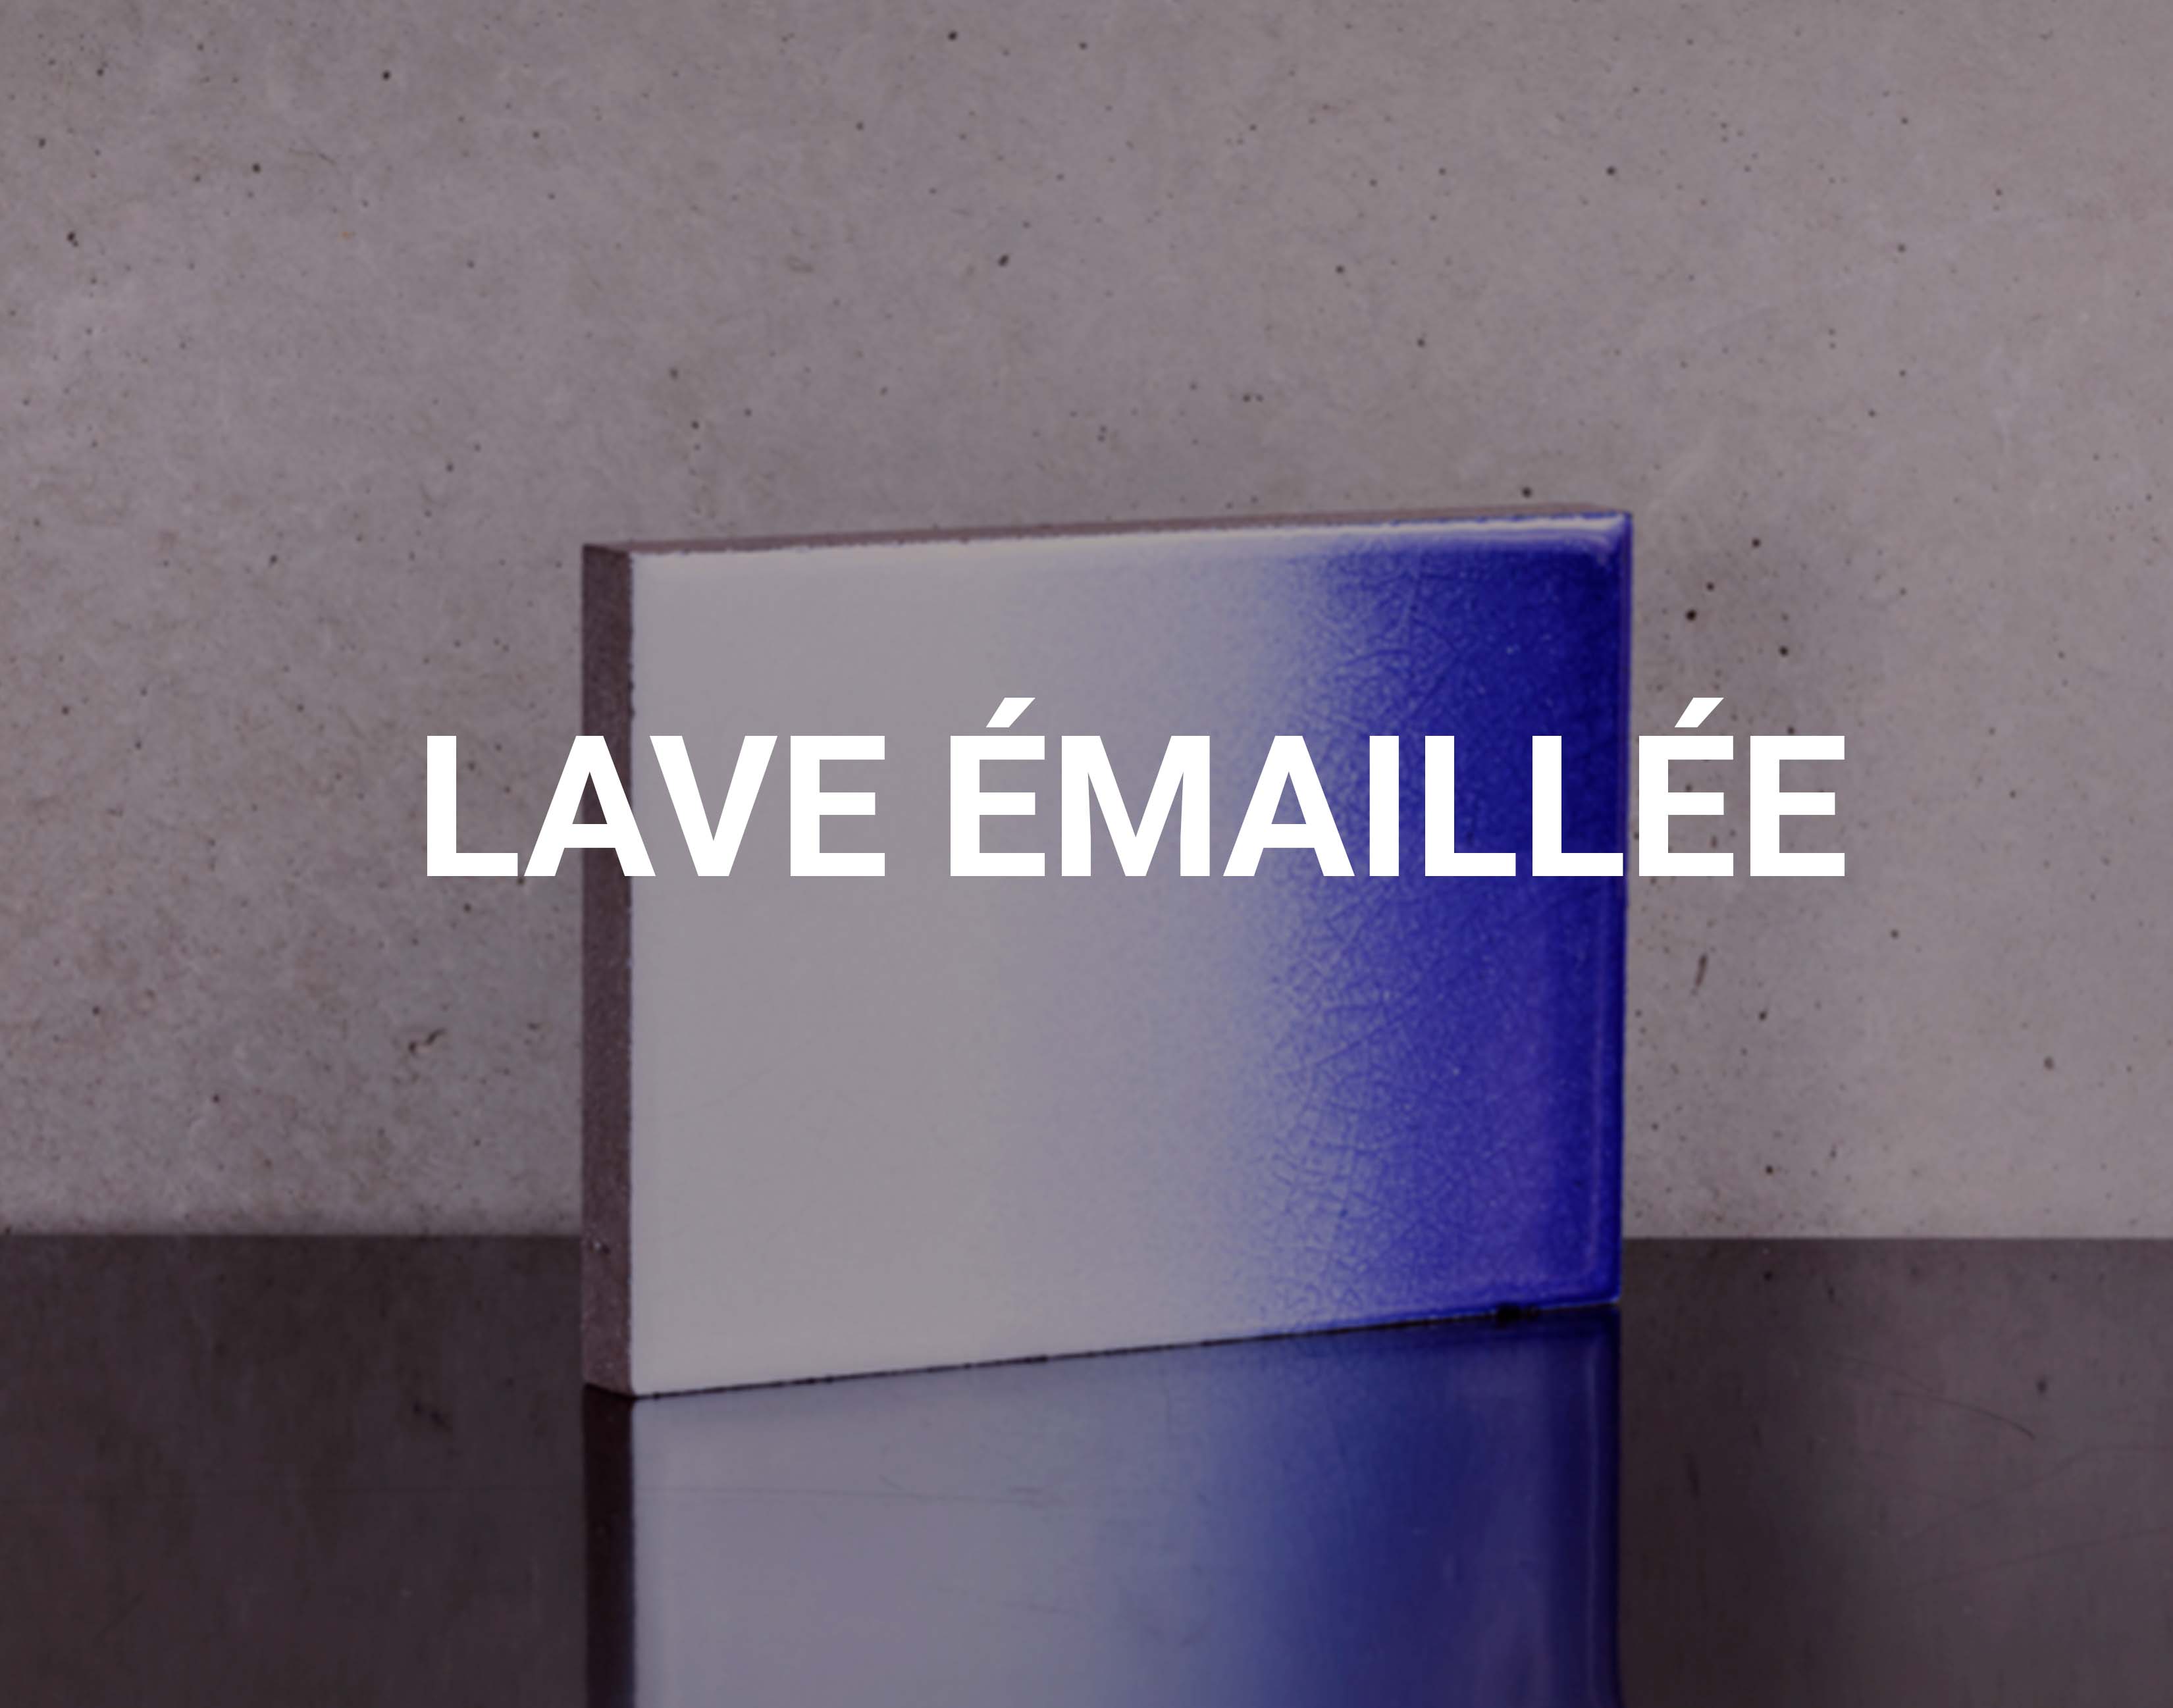 LAVE EMAILLÉE